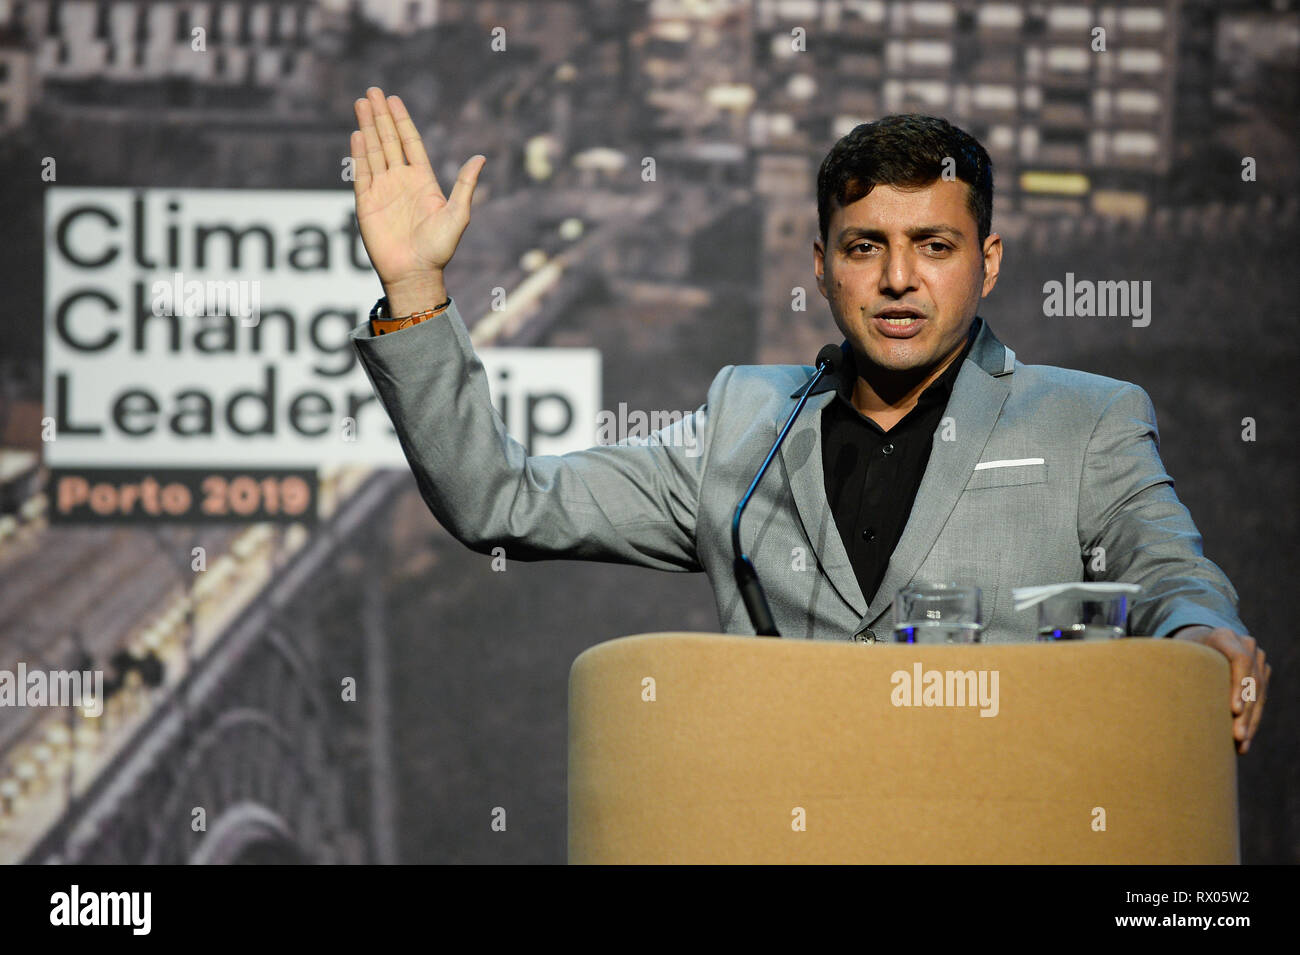 Afroz Shah, Indian Activist seen speaking during the Climate Change Porto Summit at Alfandega Congress Center. Stock Photo